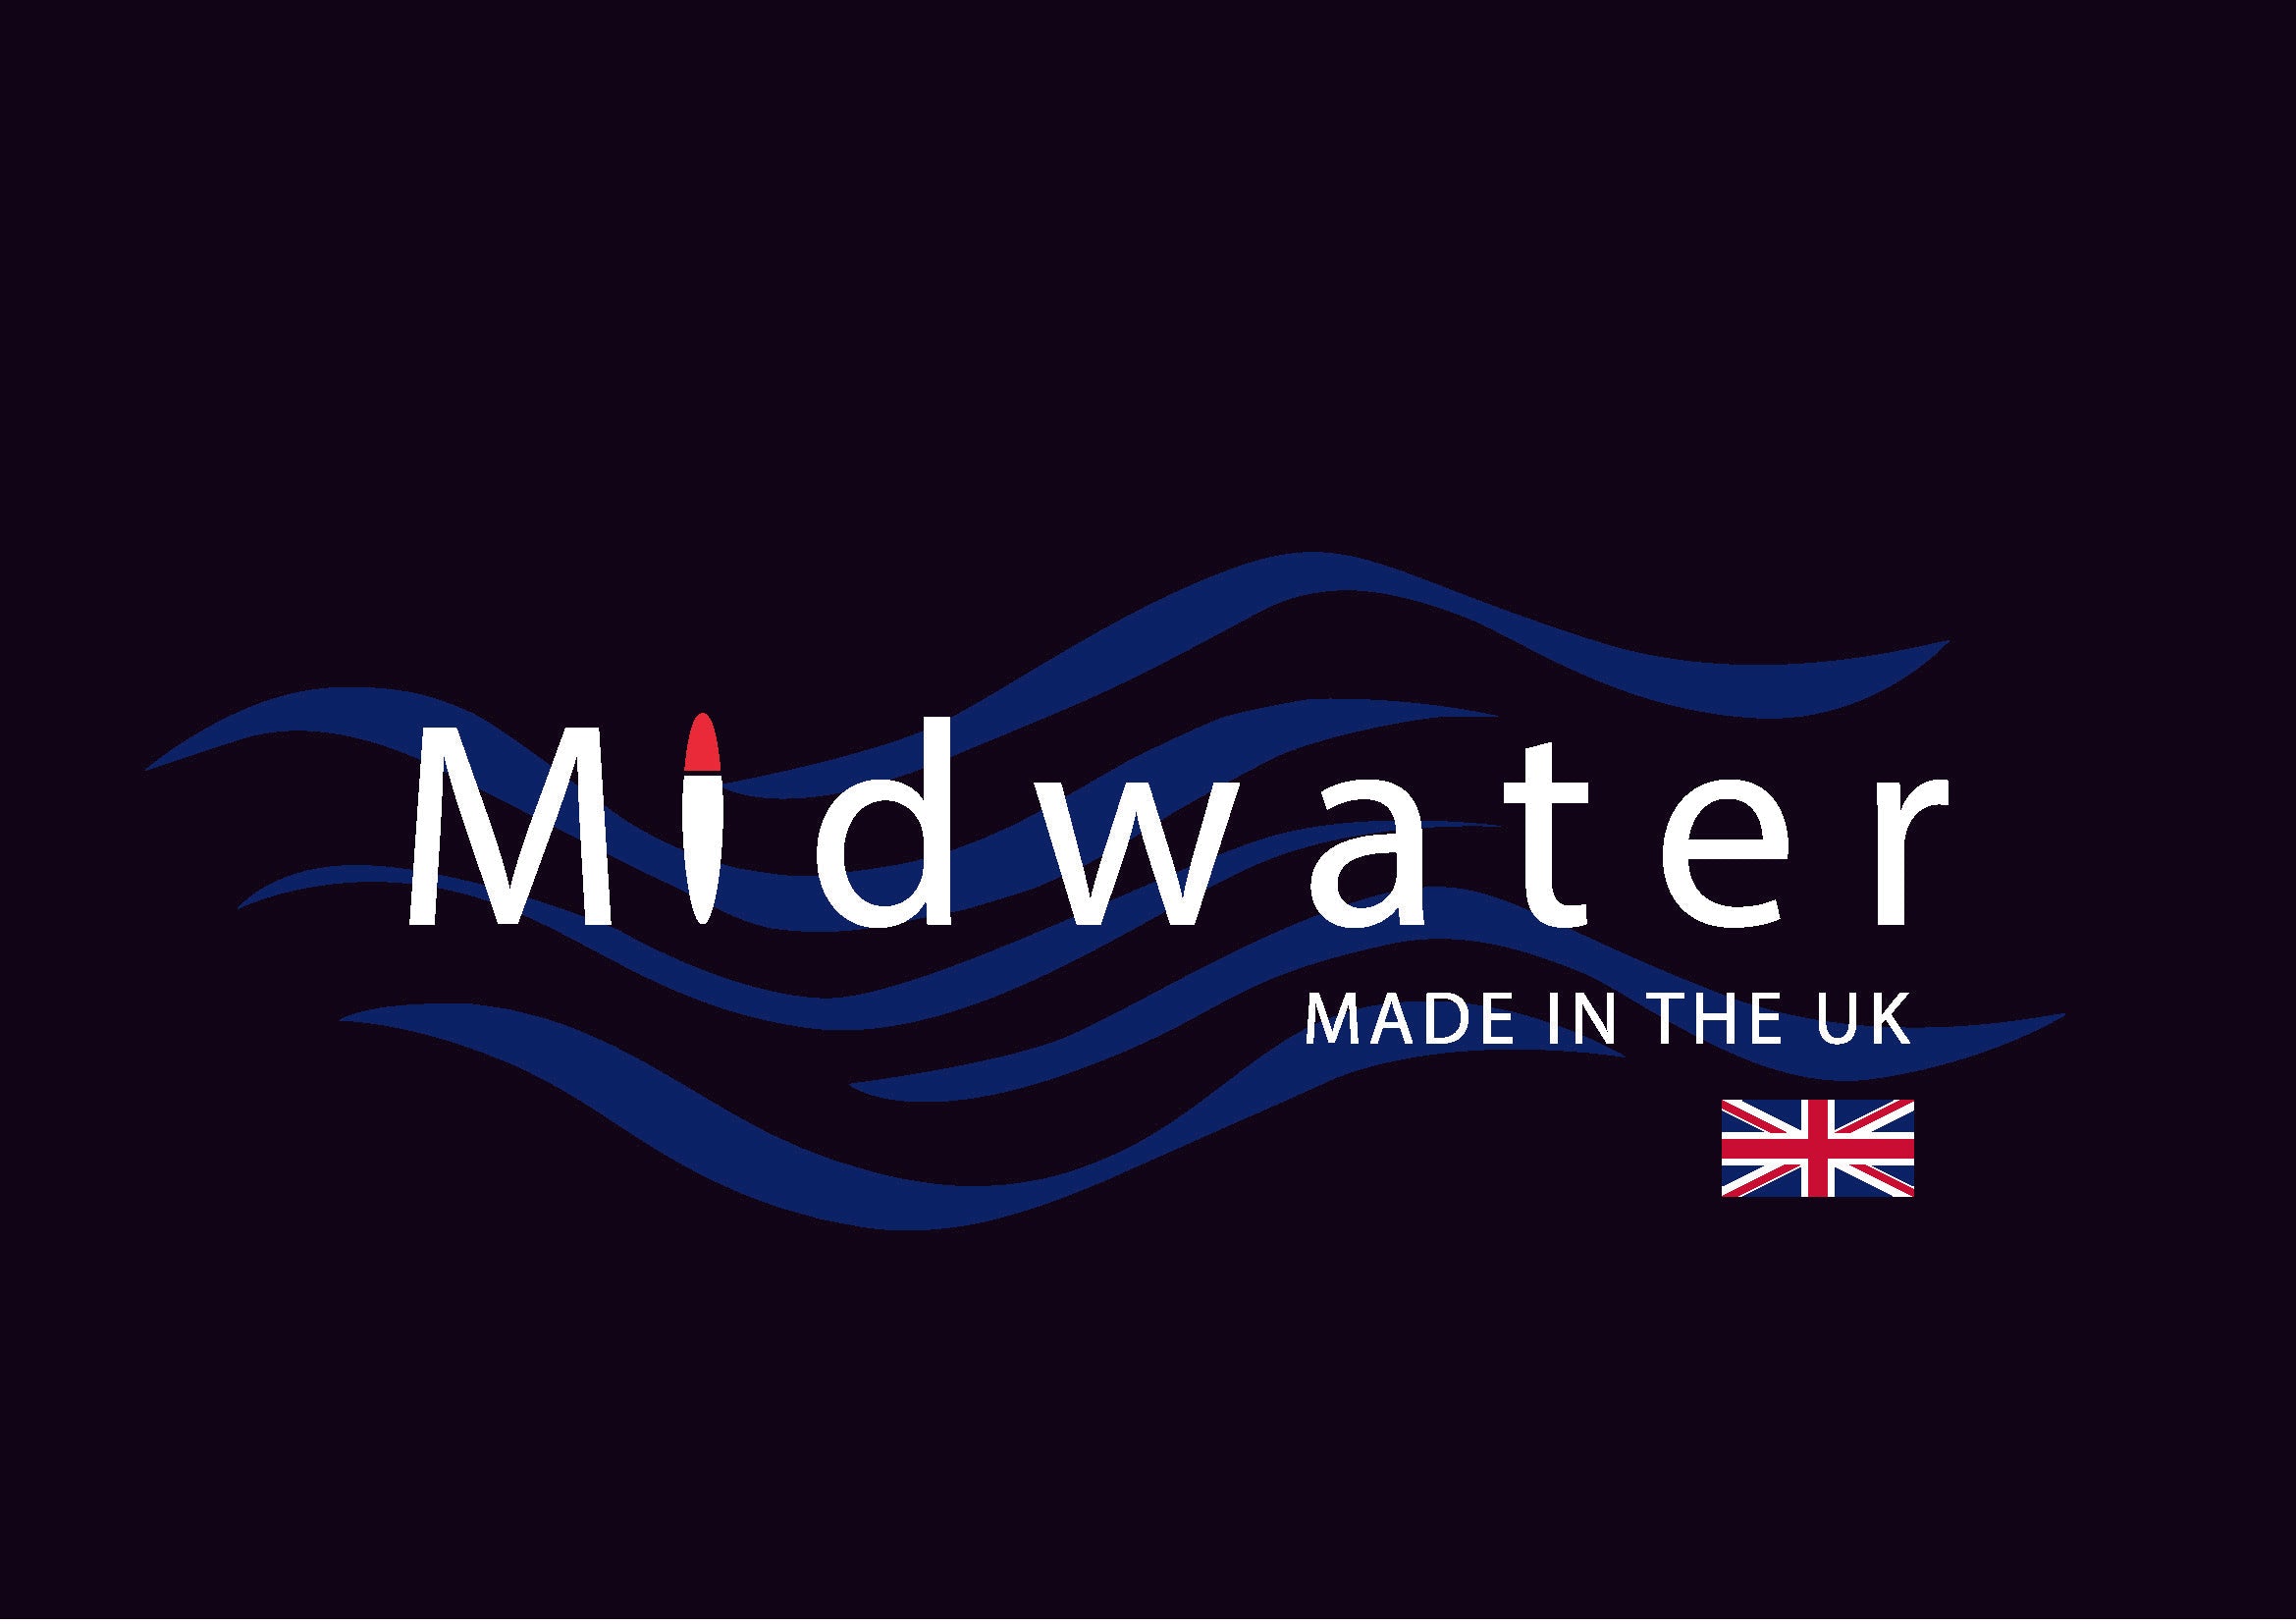 Carp or Sea Fishing. British made by Midwater for Coarse Large Reel Cases